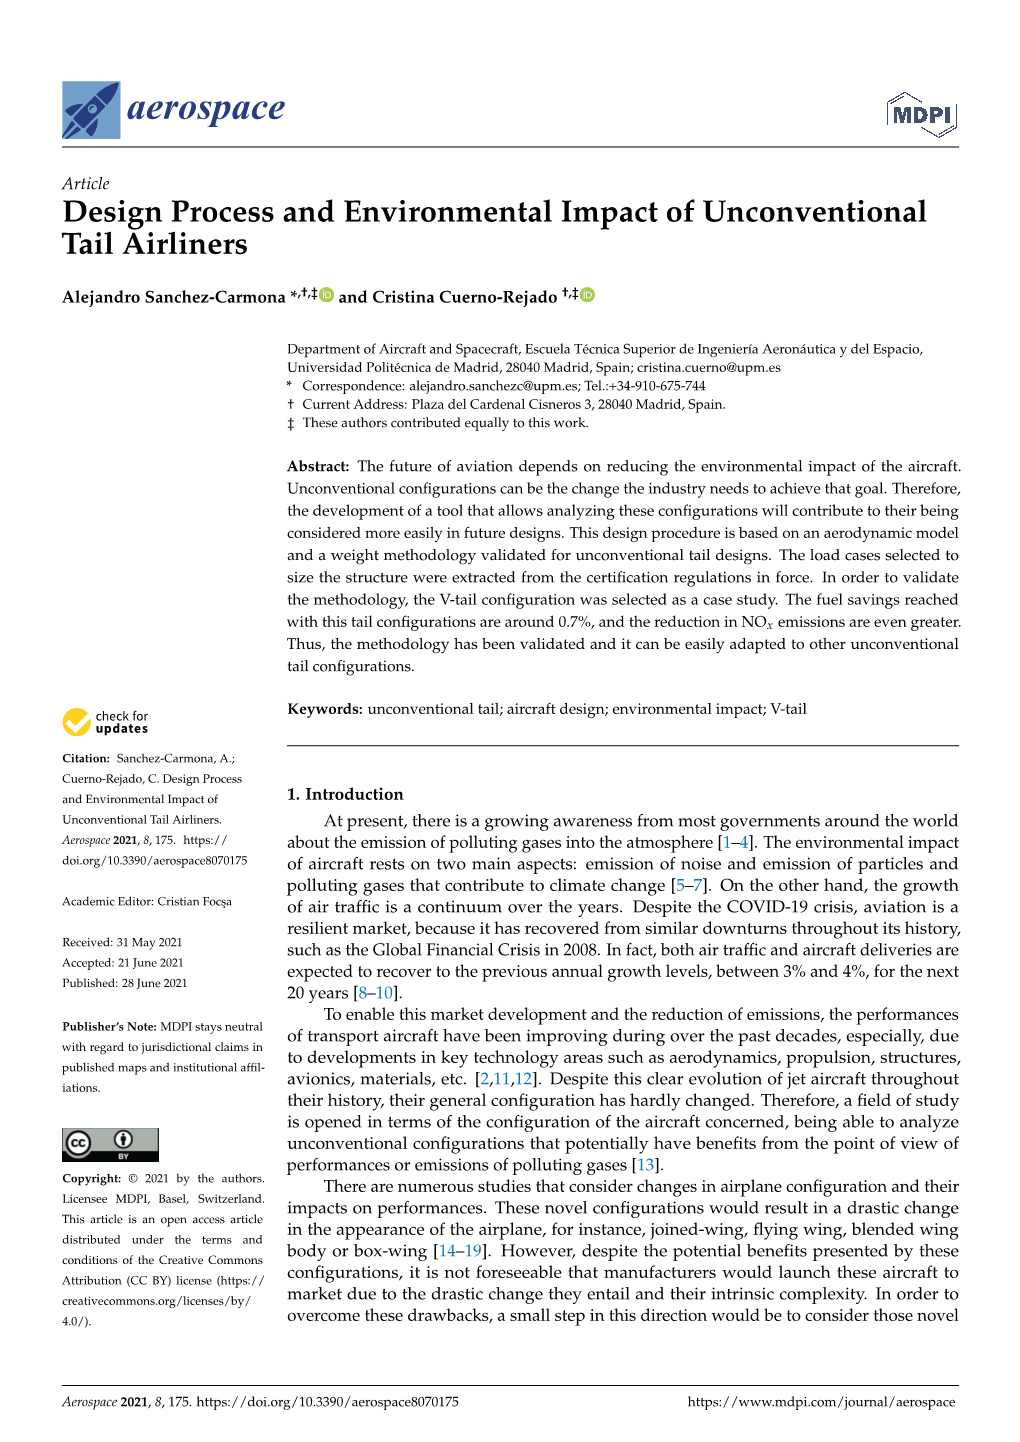 Design Process and Environmental Impact of Unconventional Tail Airliners